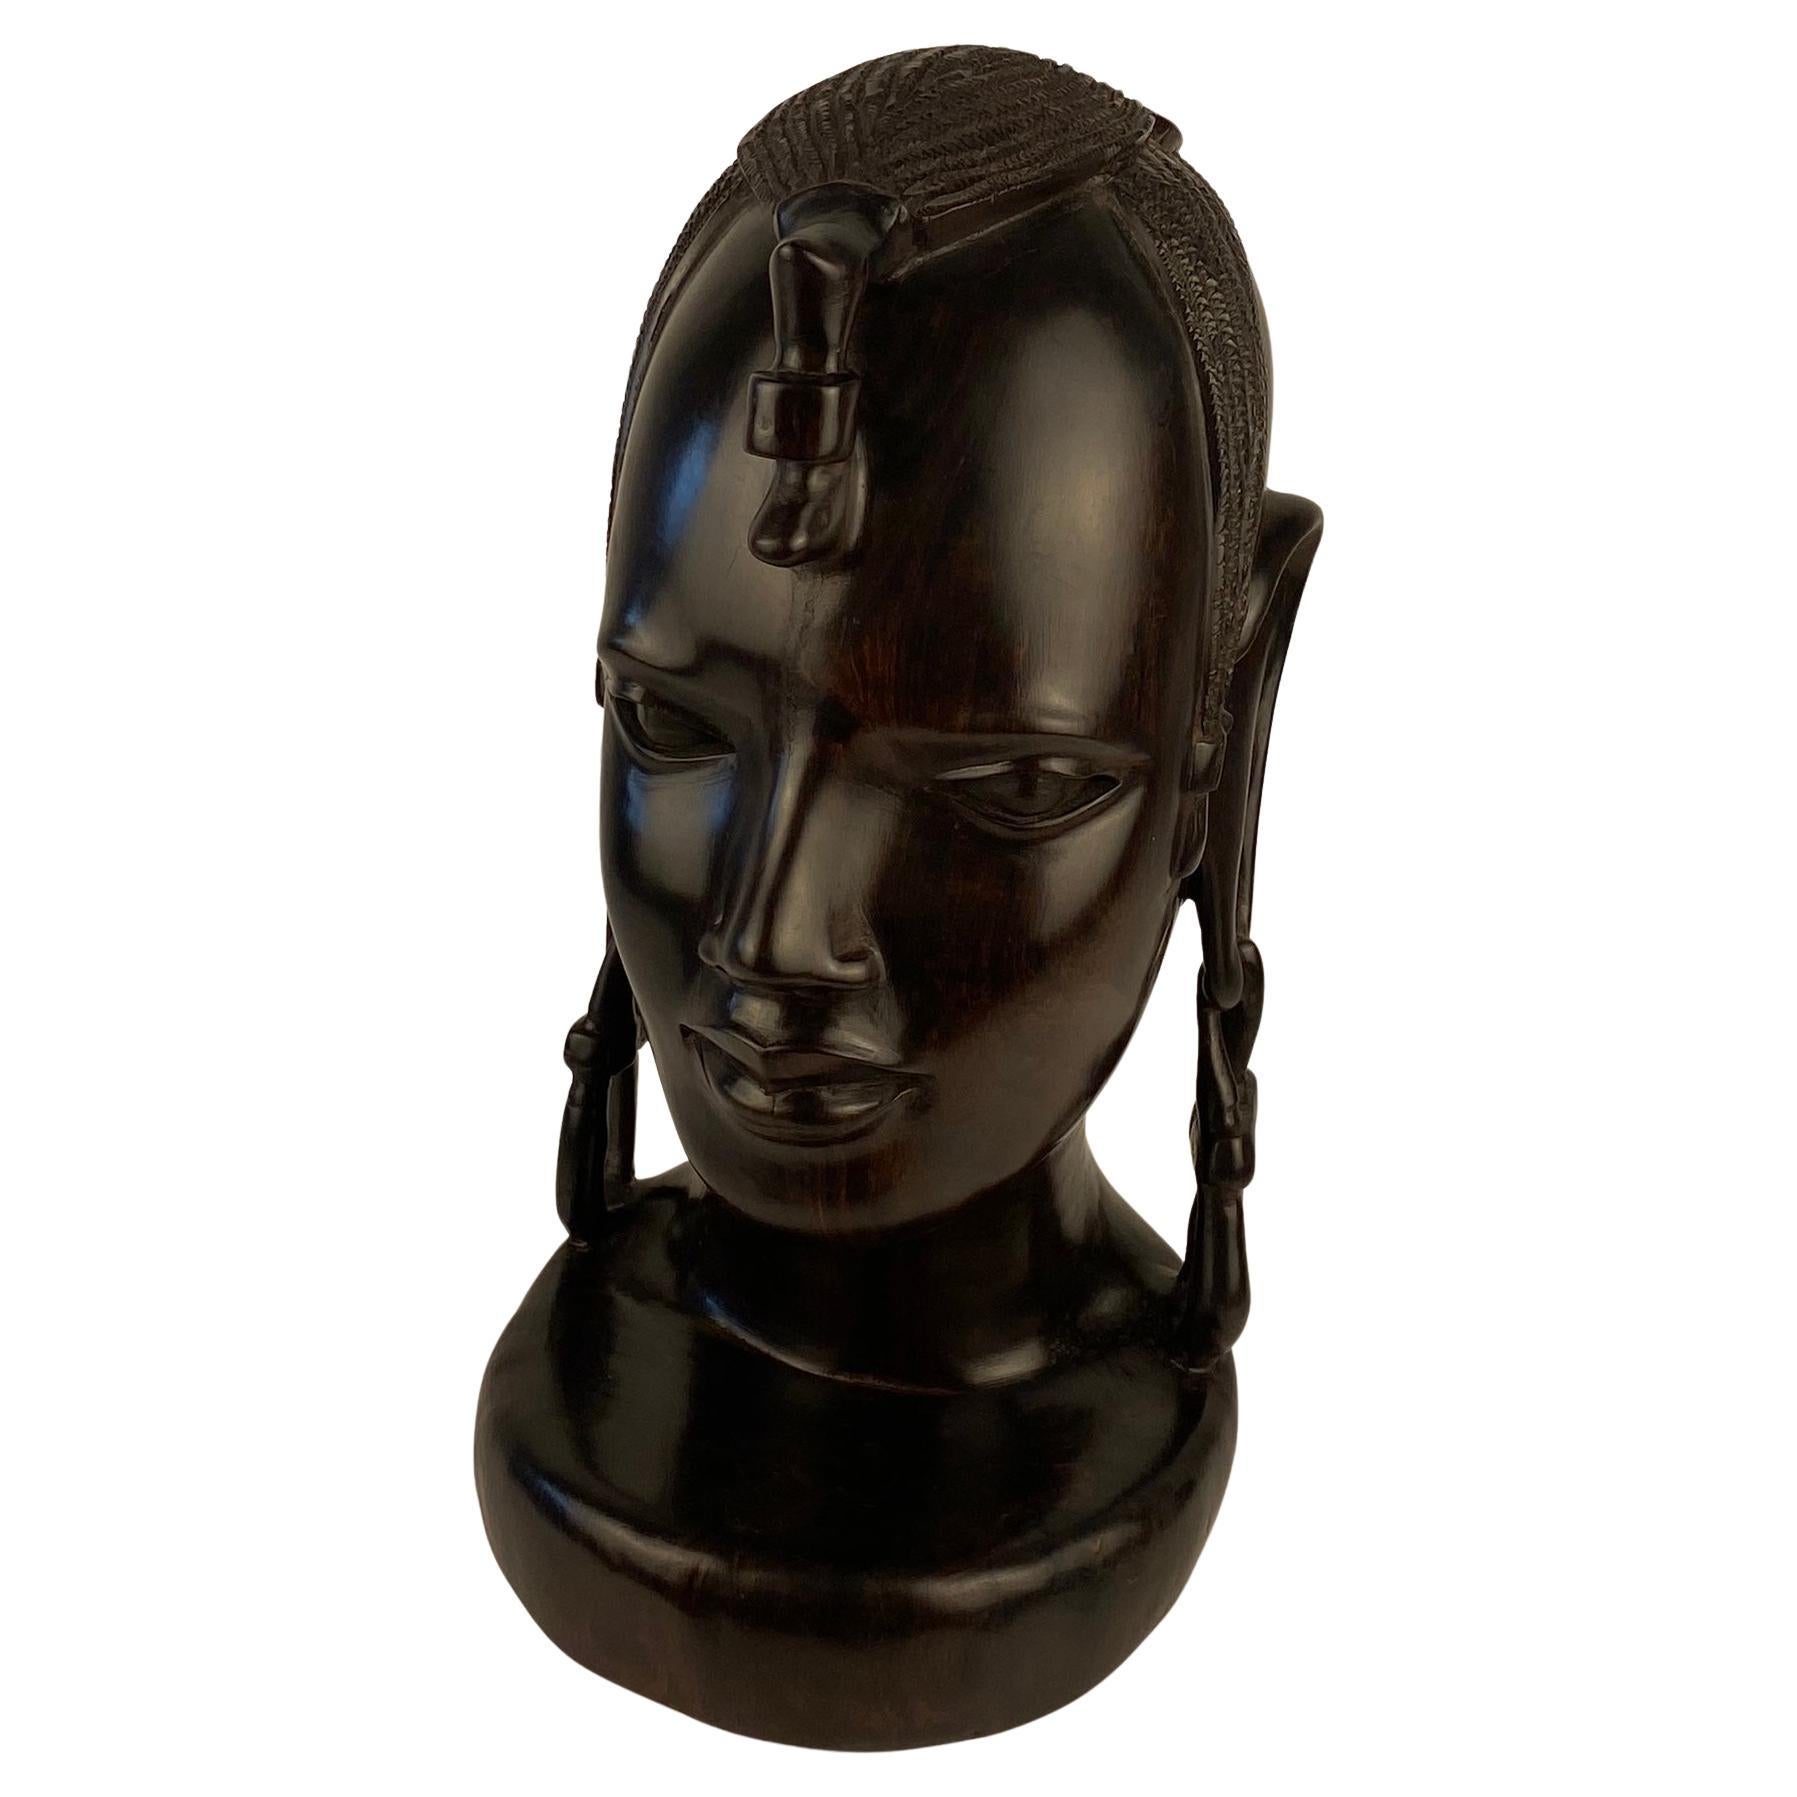 Stunning African Art Sculpture of a Tribal Woman by the Makonde Tribe of Tanzania.

A fine figurative sculpture is made of ebony. This decorative piece of African art is truly eye-catching and has exquisite details. Carved by artist from the Makonde